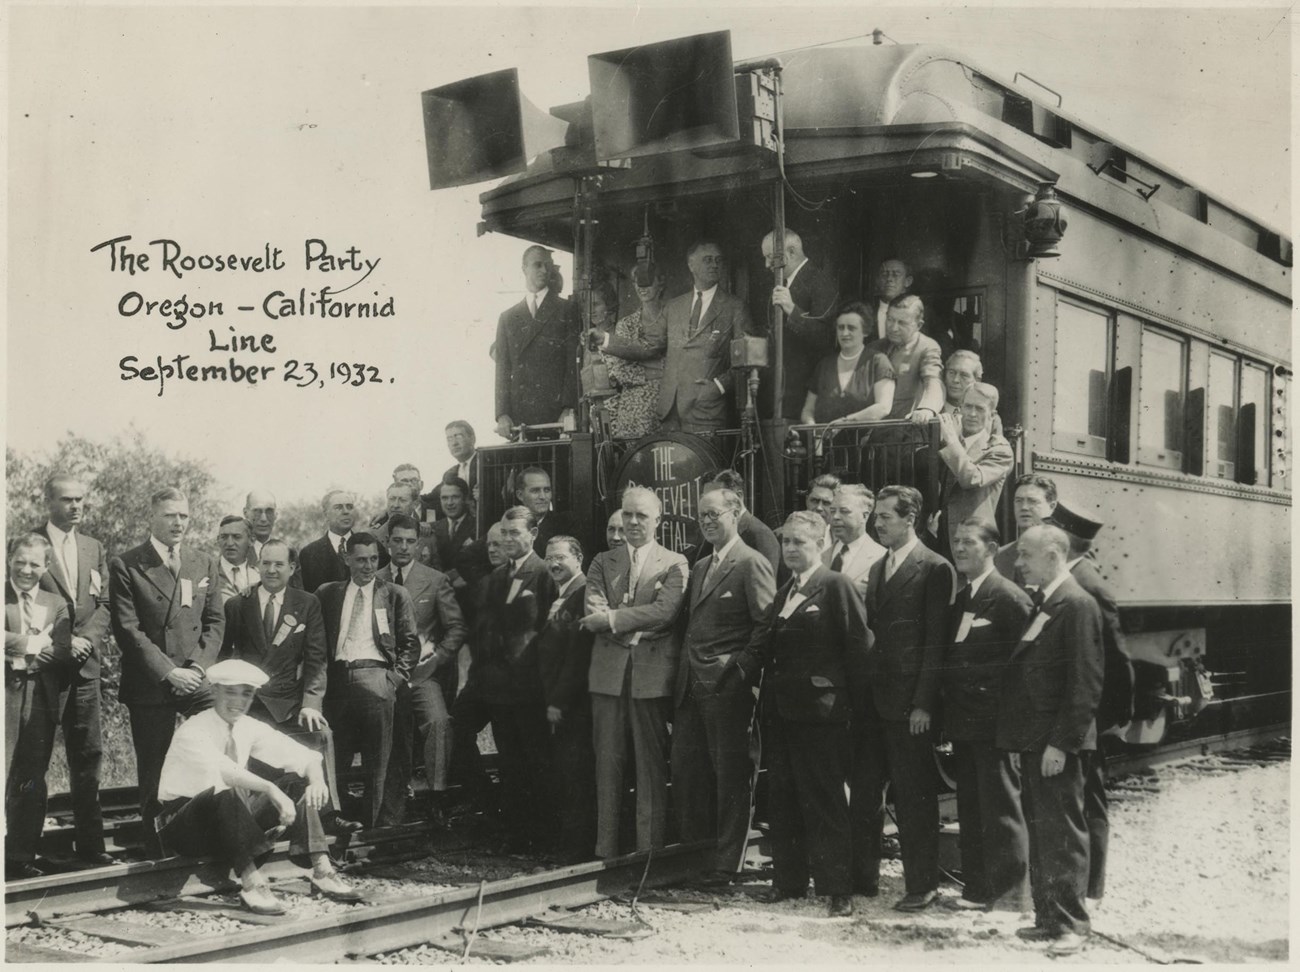 Group of men stand at the back of a train car. FDR is at the back railing. JPK stands below on the train tracks.